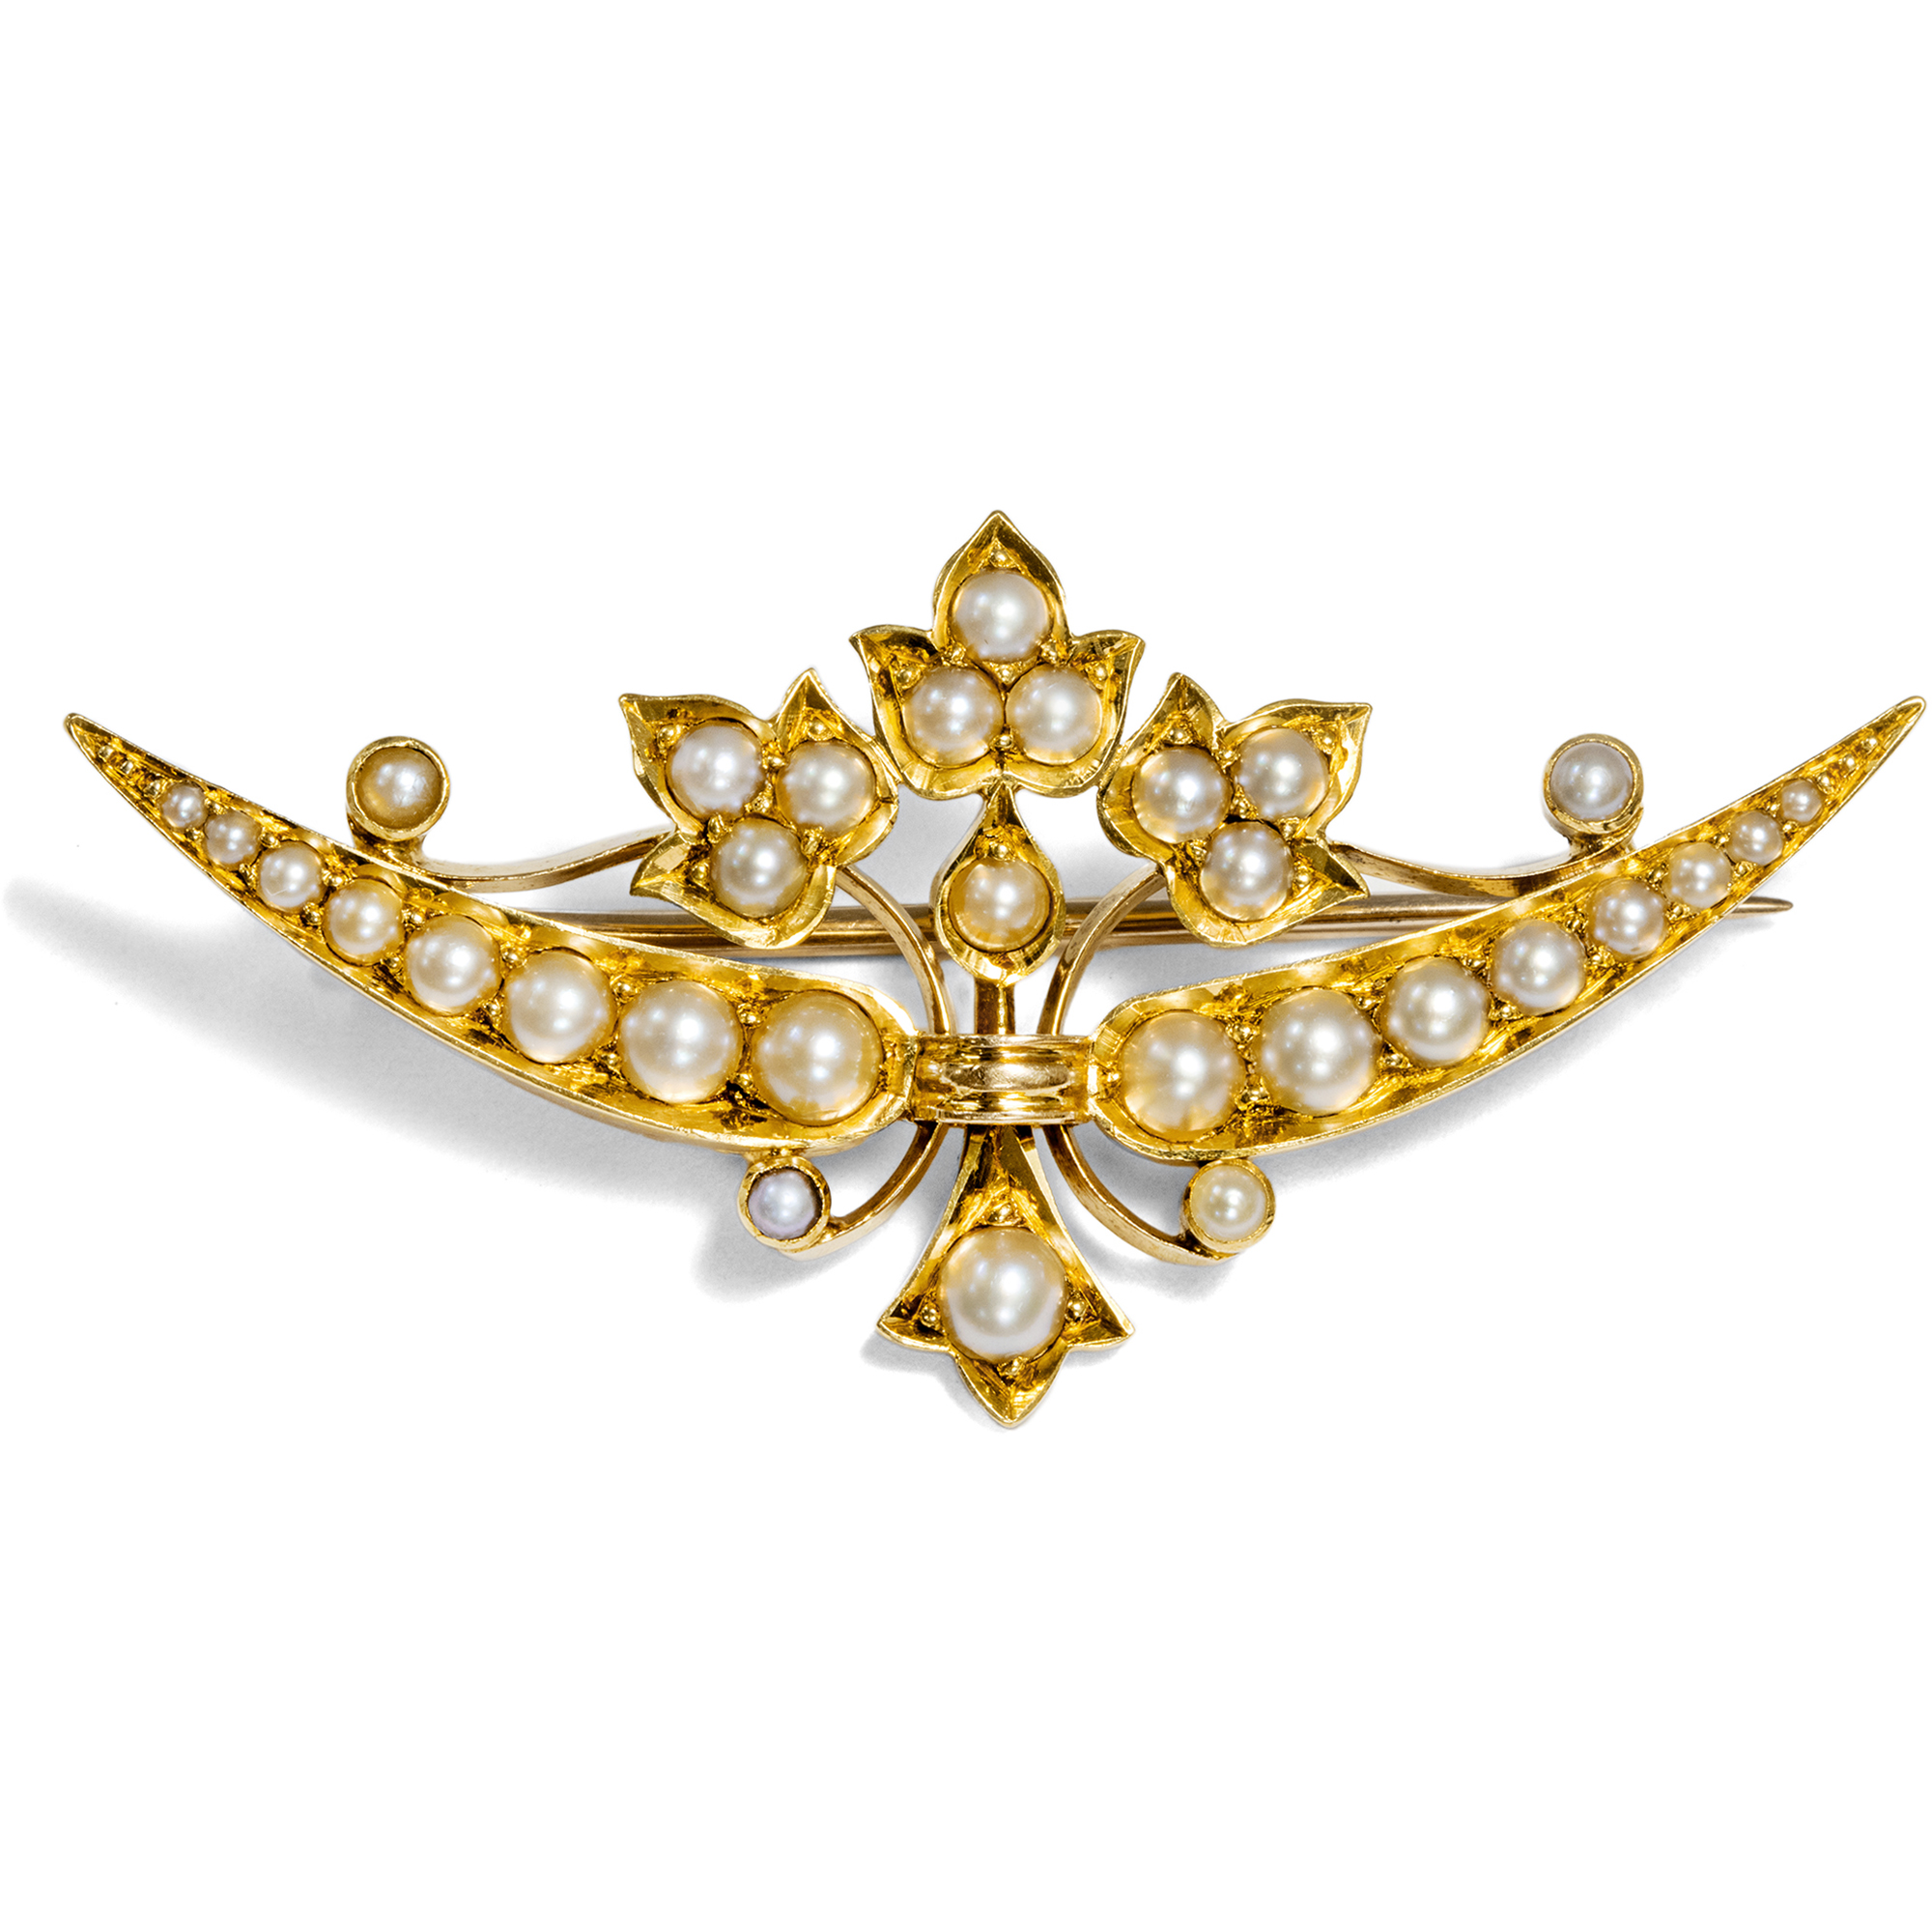 Antique "Honeymoon" Brooch with Natural Pearls in Gold, England c. 1900